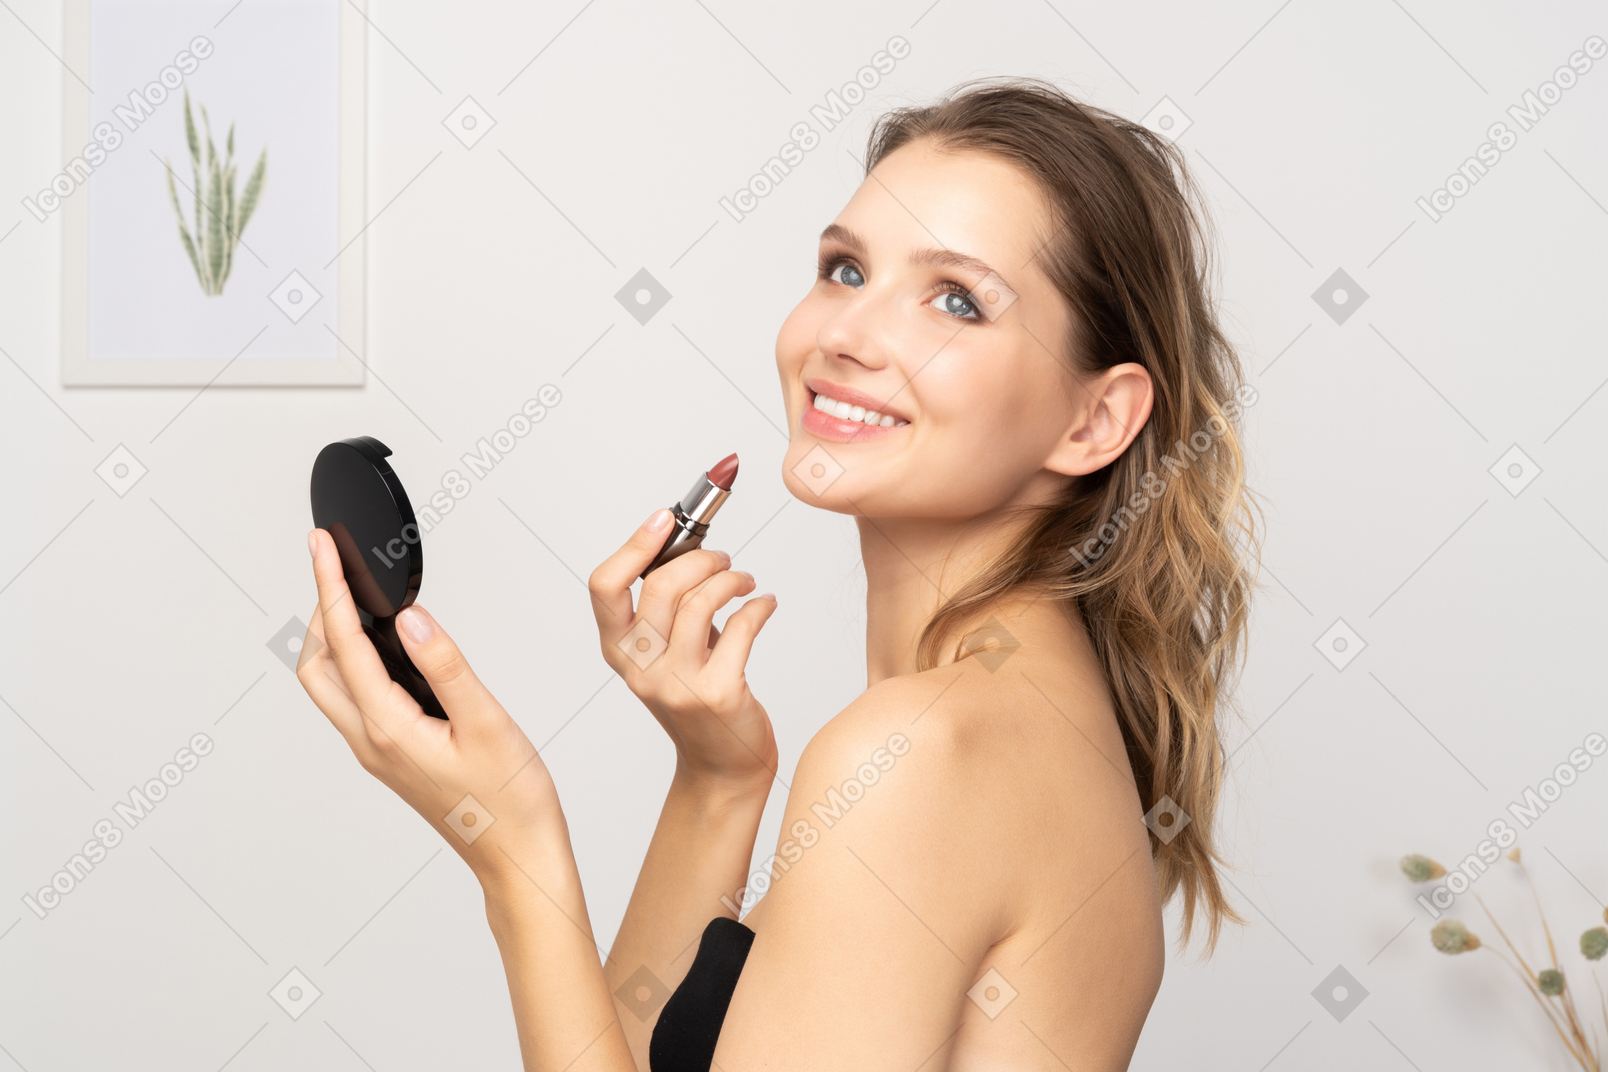 Side view of a smiling young woman applying lipstick while holding a mirror